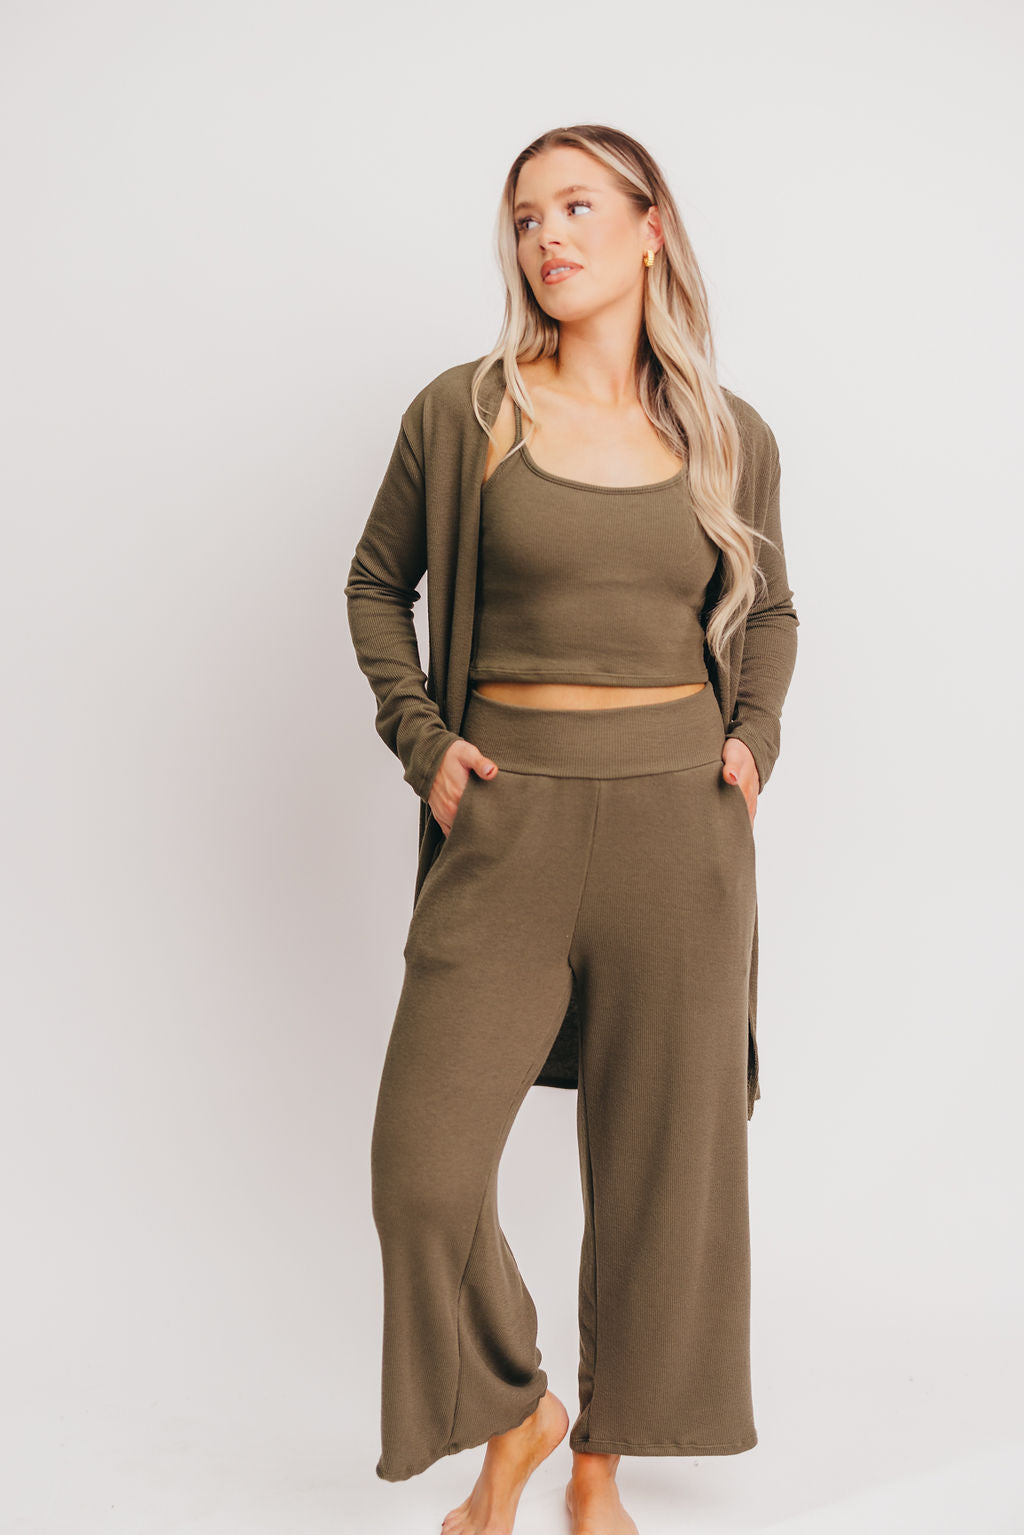 Betsy Ribbed Cardigan in Olive - Inclusive Sizing (S-2X)